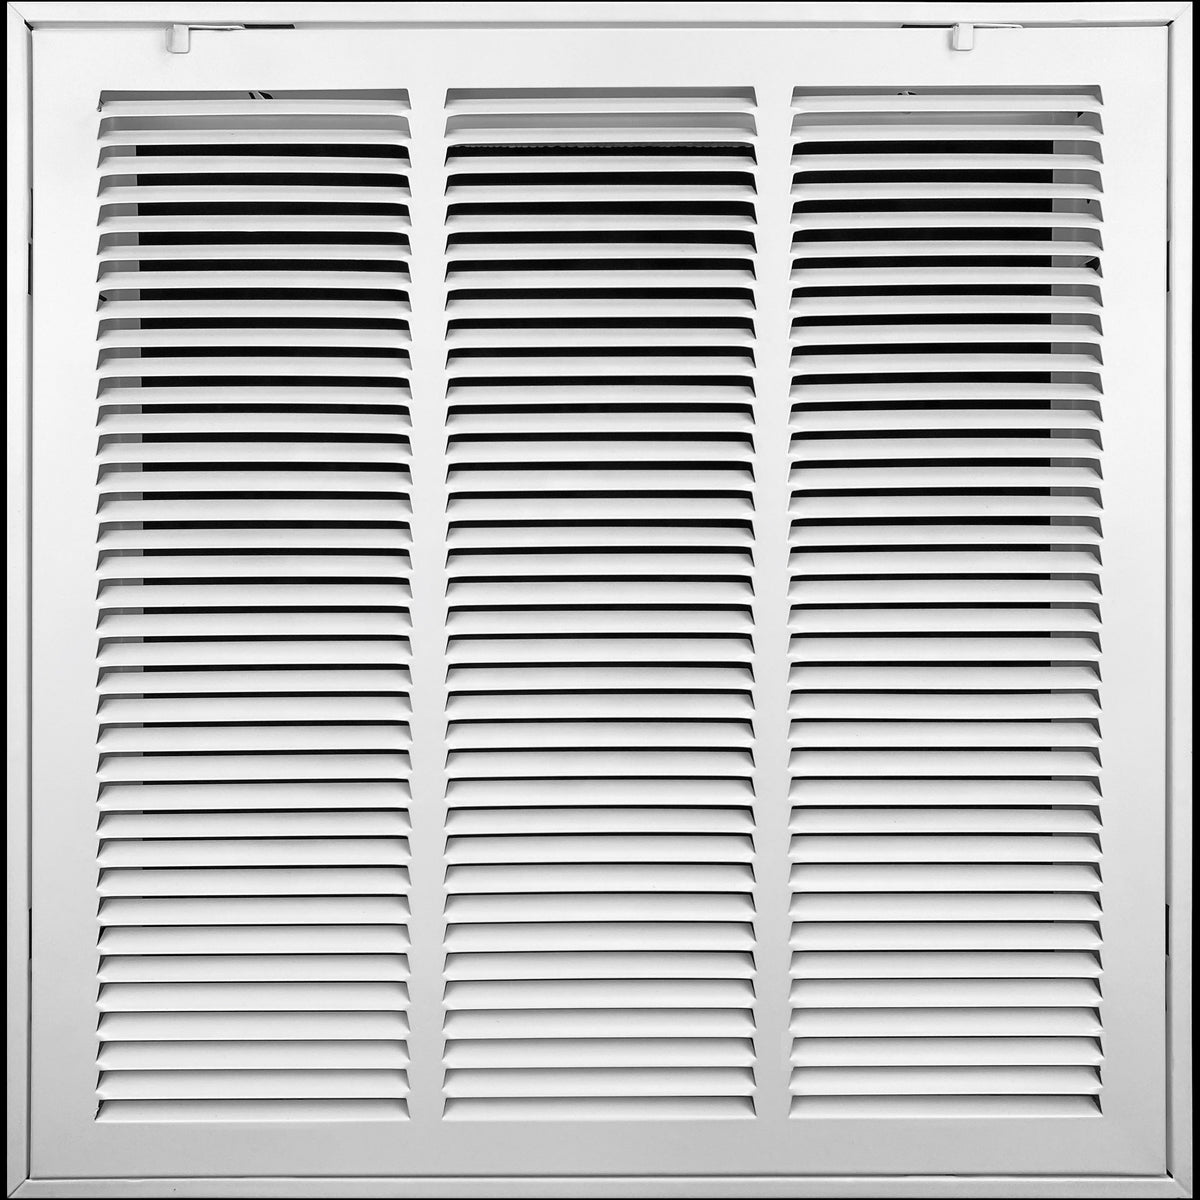 airgrilles 18" x 18" duct opening   hd steel return air filter grille for sidewall and ceiling  agc  7agc-1raf-wh-18x18 756014649420 - 1